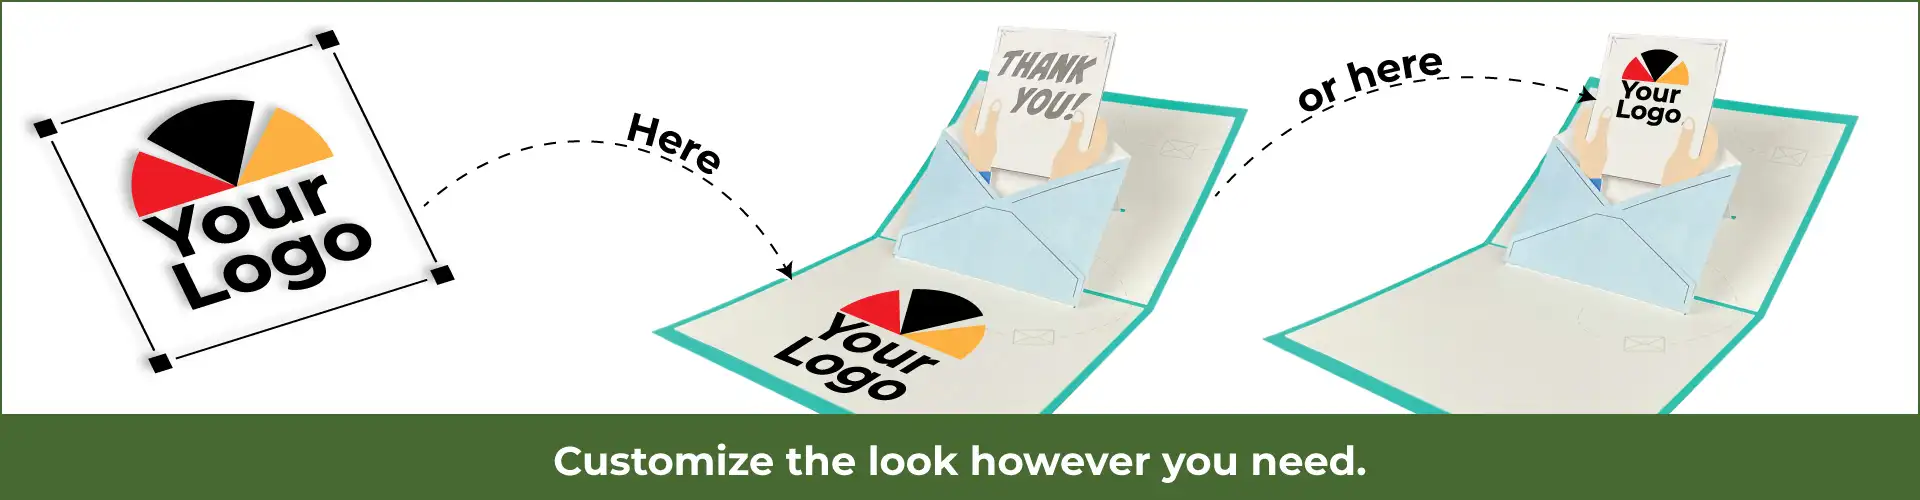 custom pop-up card with your logo